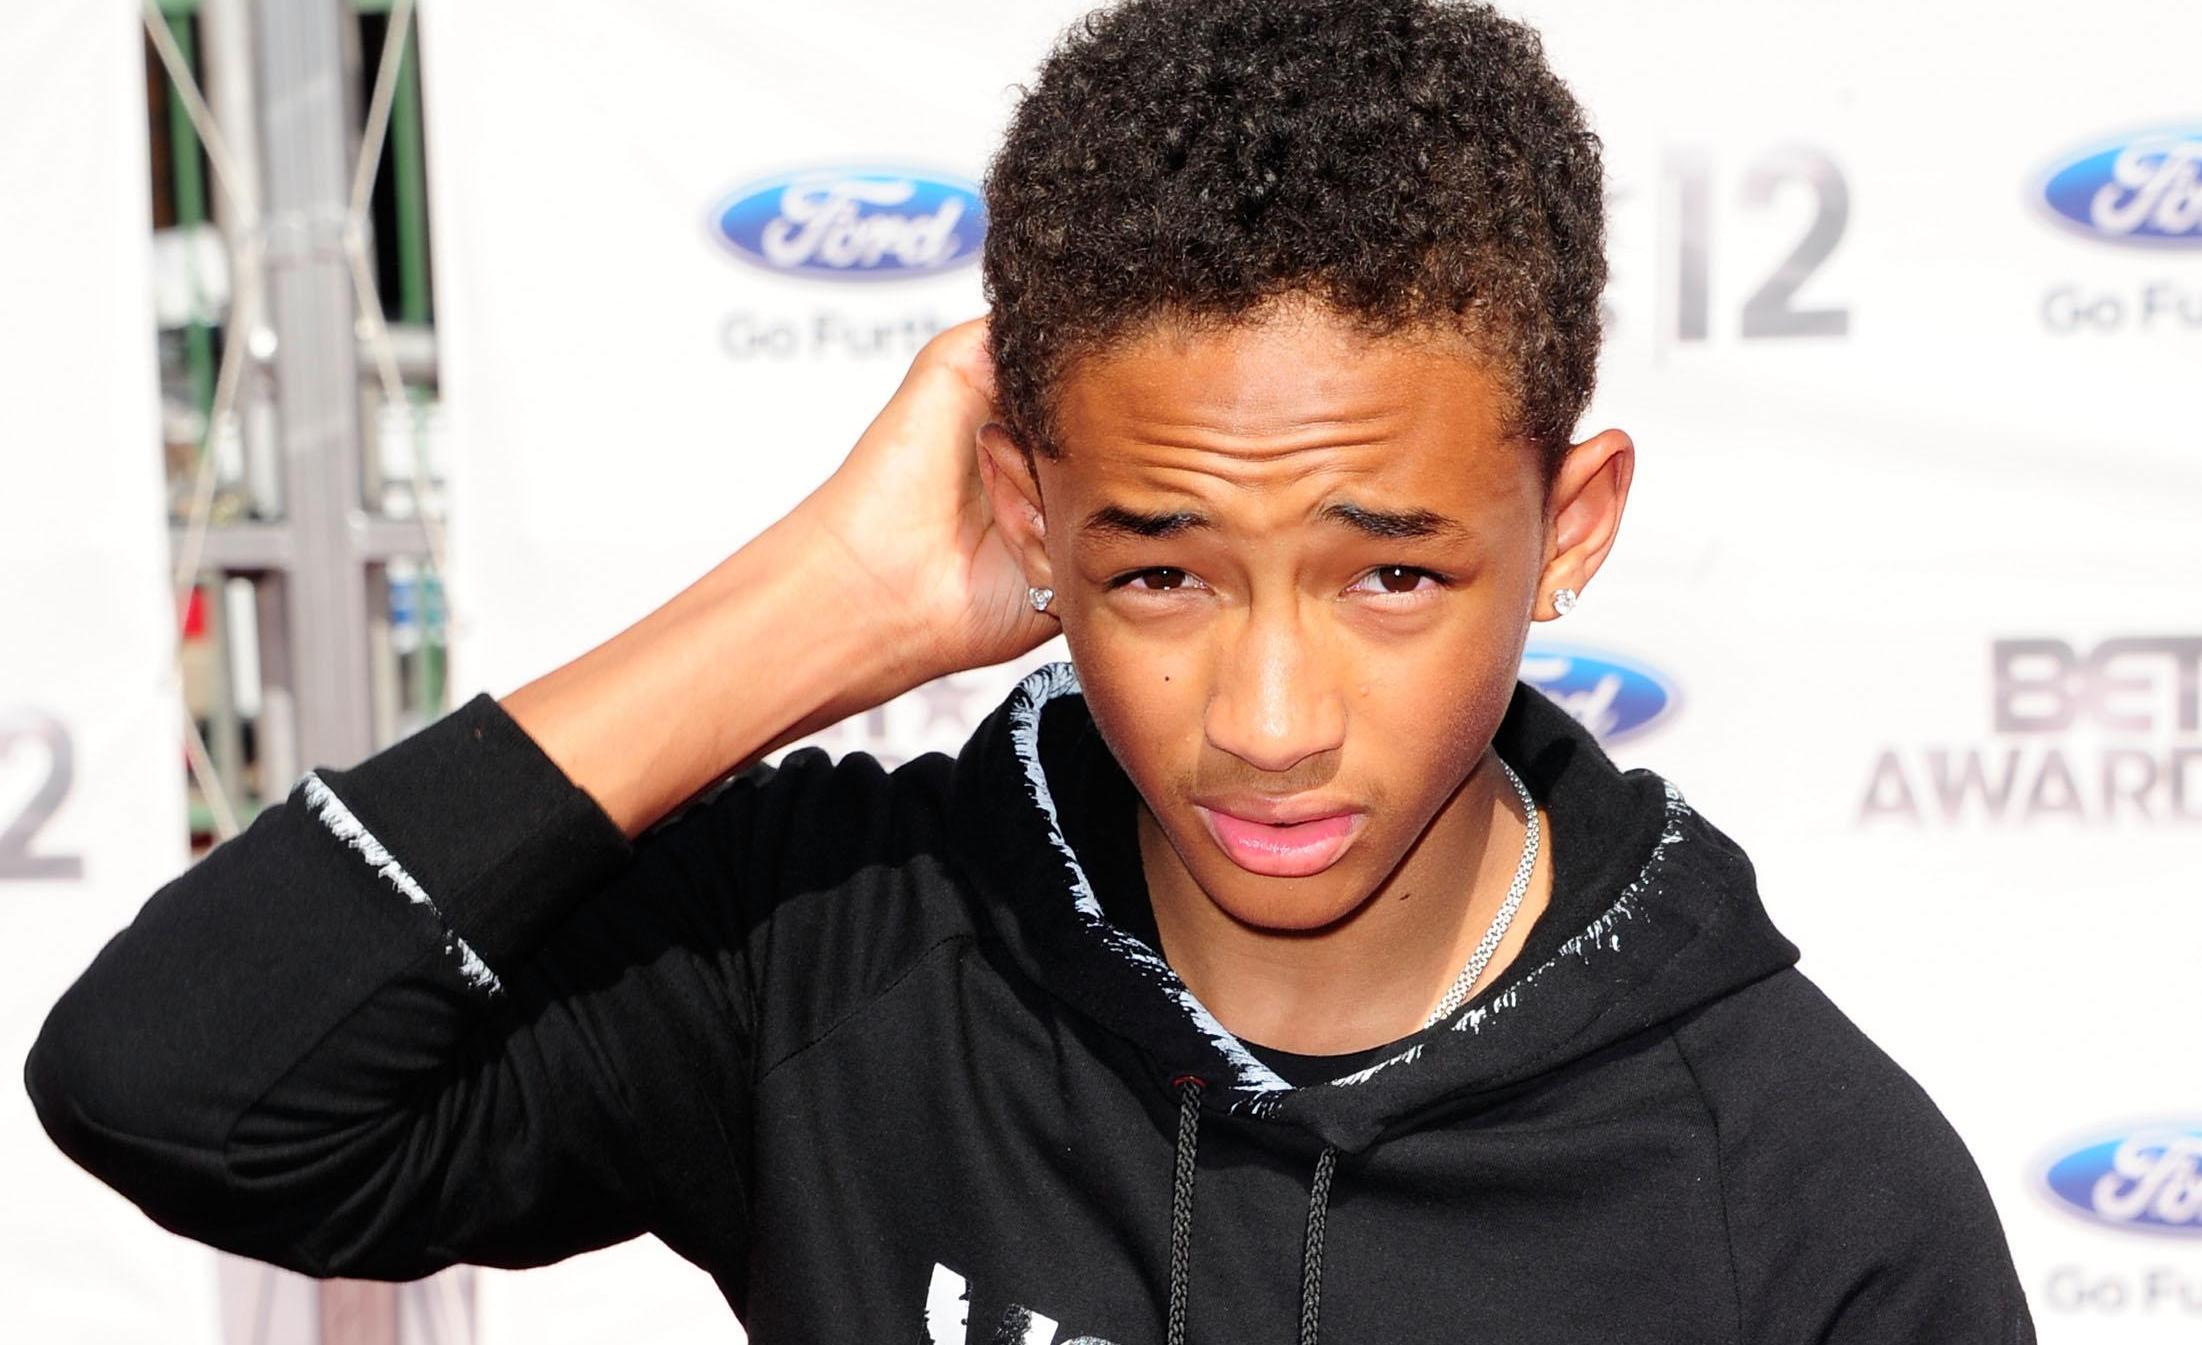 Jaden Smith Wallpaper. High Definition. 100% Quality Mobile